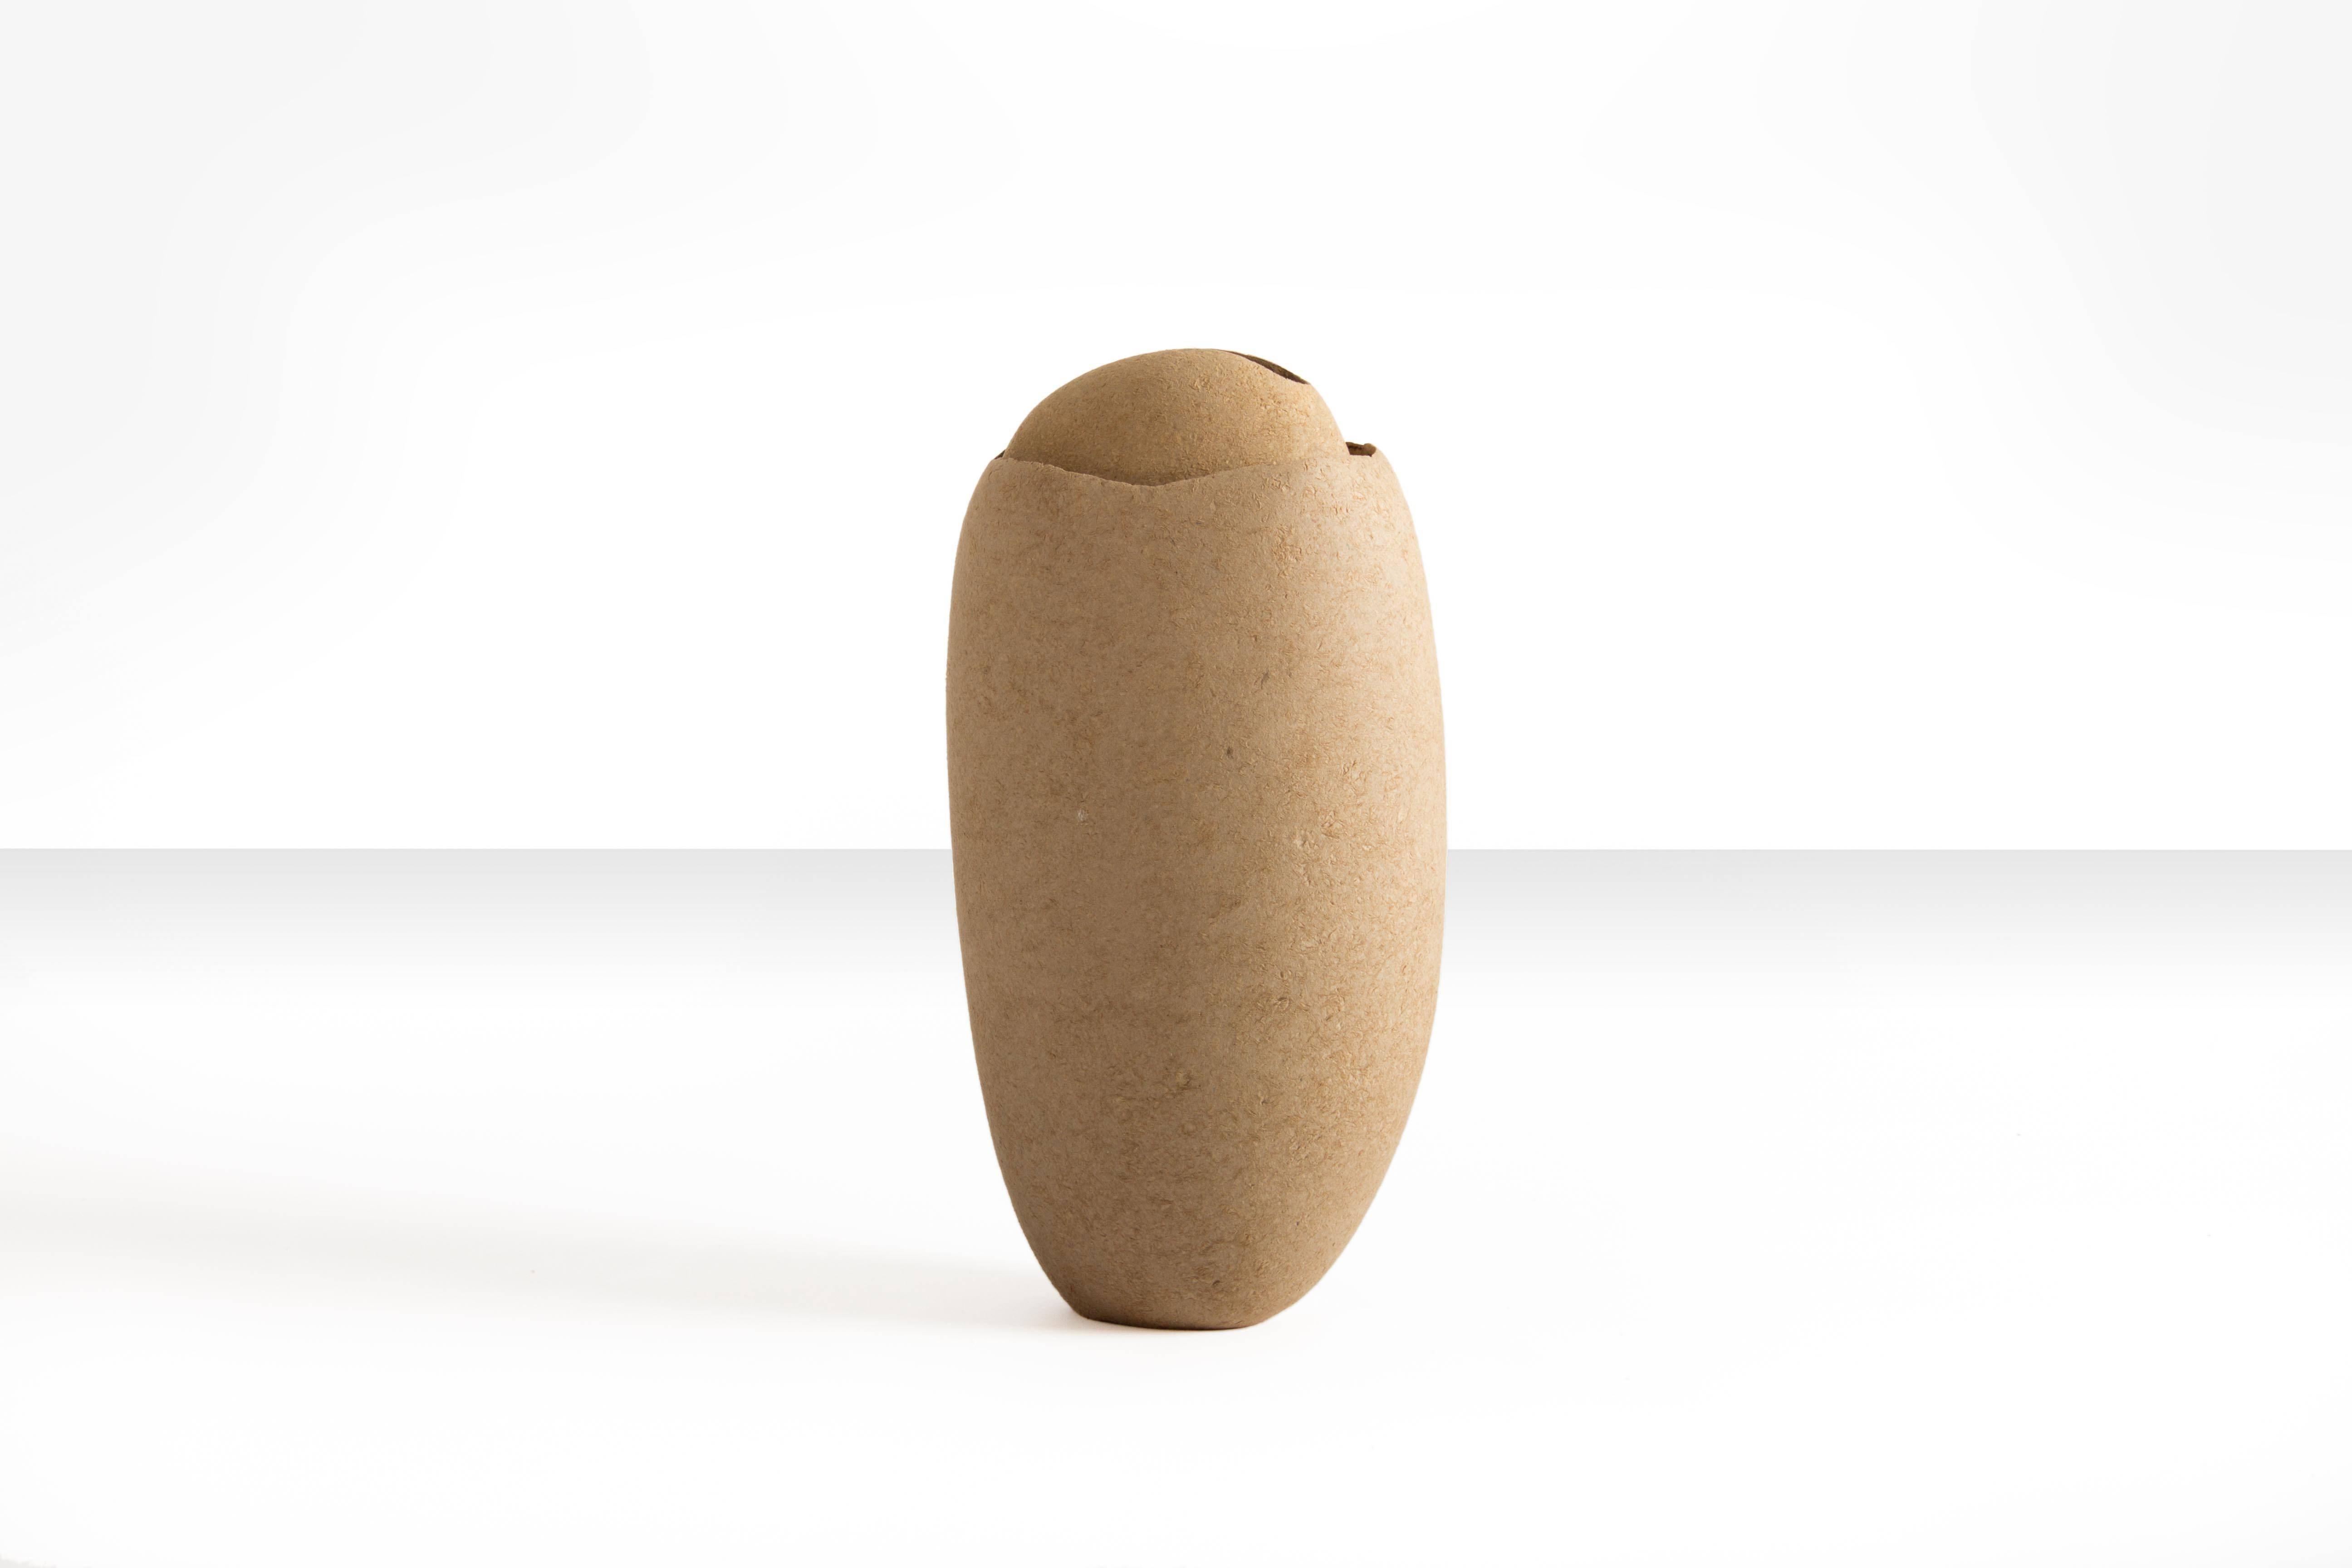 Organic shell vase by contemporary artist Domingos Tótora. Made of recycled cardboard.

Domingos Tótora creates objects and sculptures where beauty is inseparable from function, lifting common everyday objects and injecting them with the spirit of